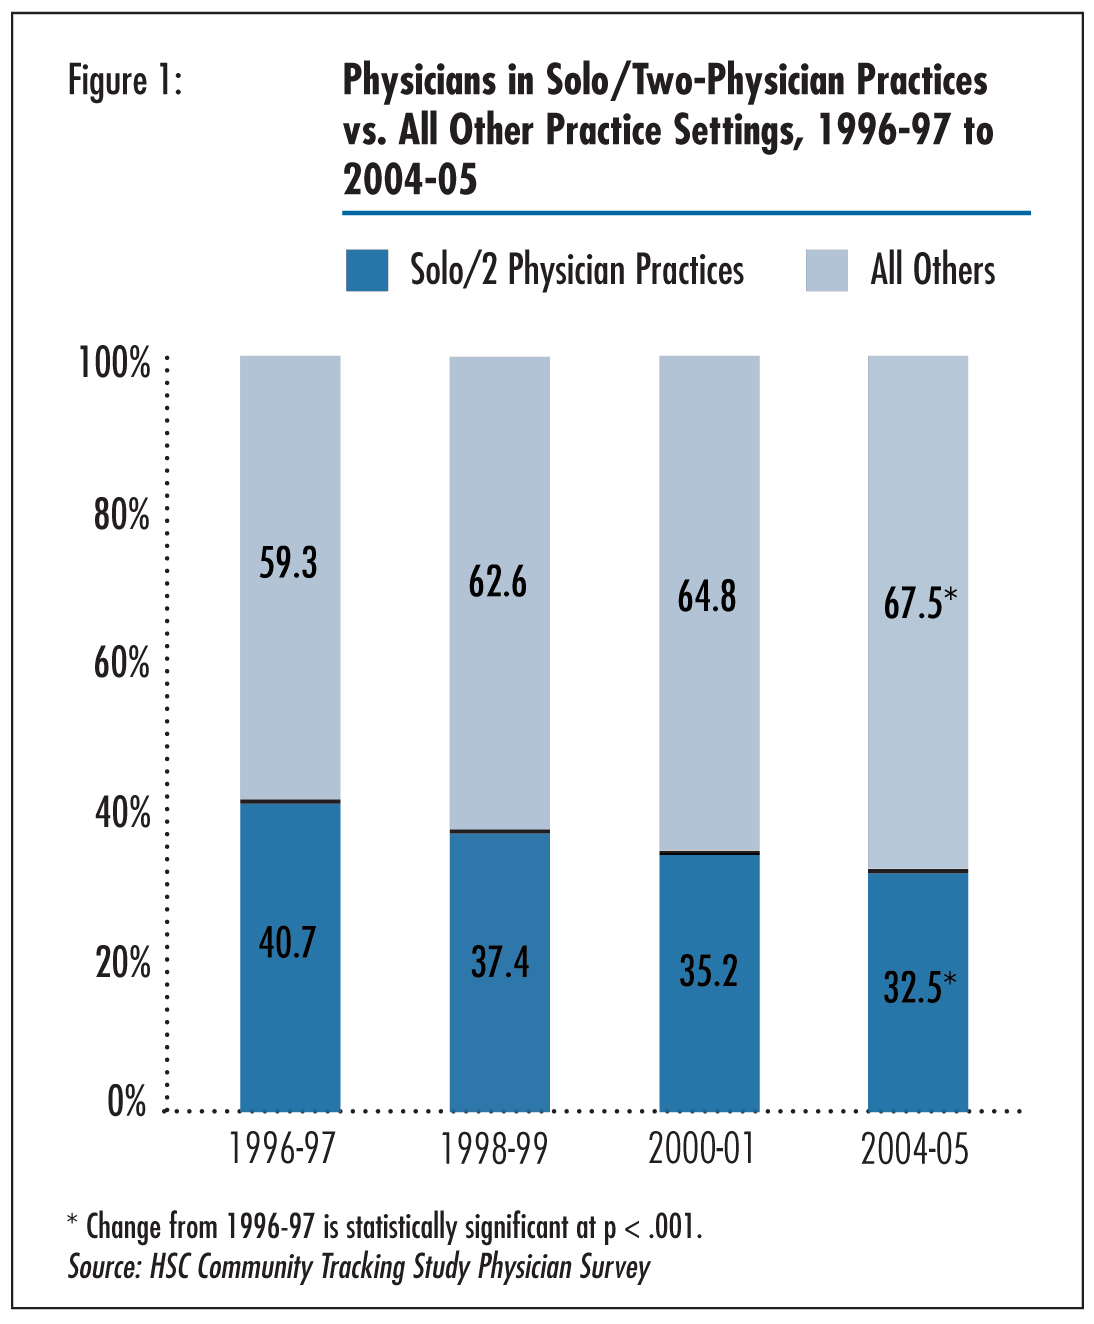 Figure 1 - Physicians in Solo/Two-Physican Practices vs. All Other Practice Settings, 1996-97 to 2004-05